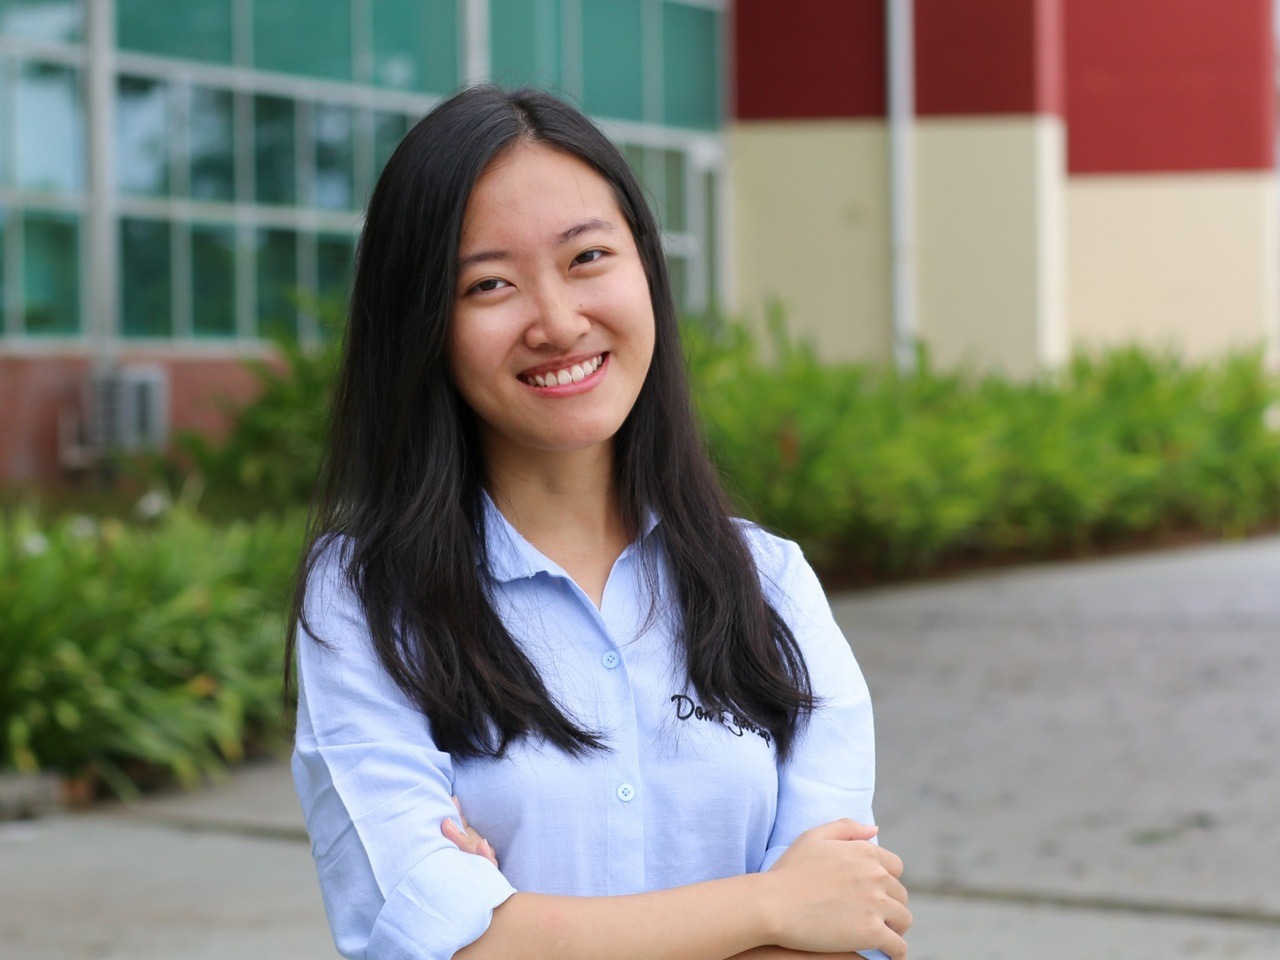 “When I first joined Curtin Malaysia, many people asked me why I chose to study here and not at the main campus in Perth. I chose Curtin Malaysia because of its affordability and the fact it offers exactly the same courses and degrees as Curtin in...